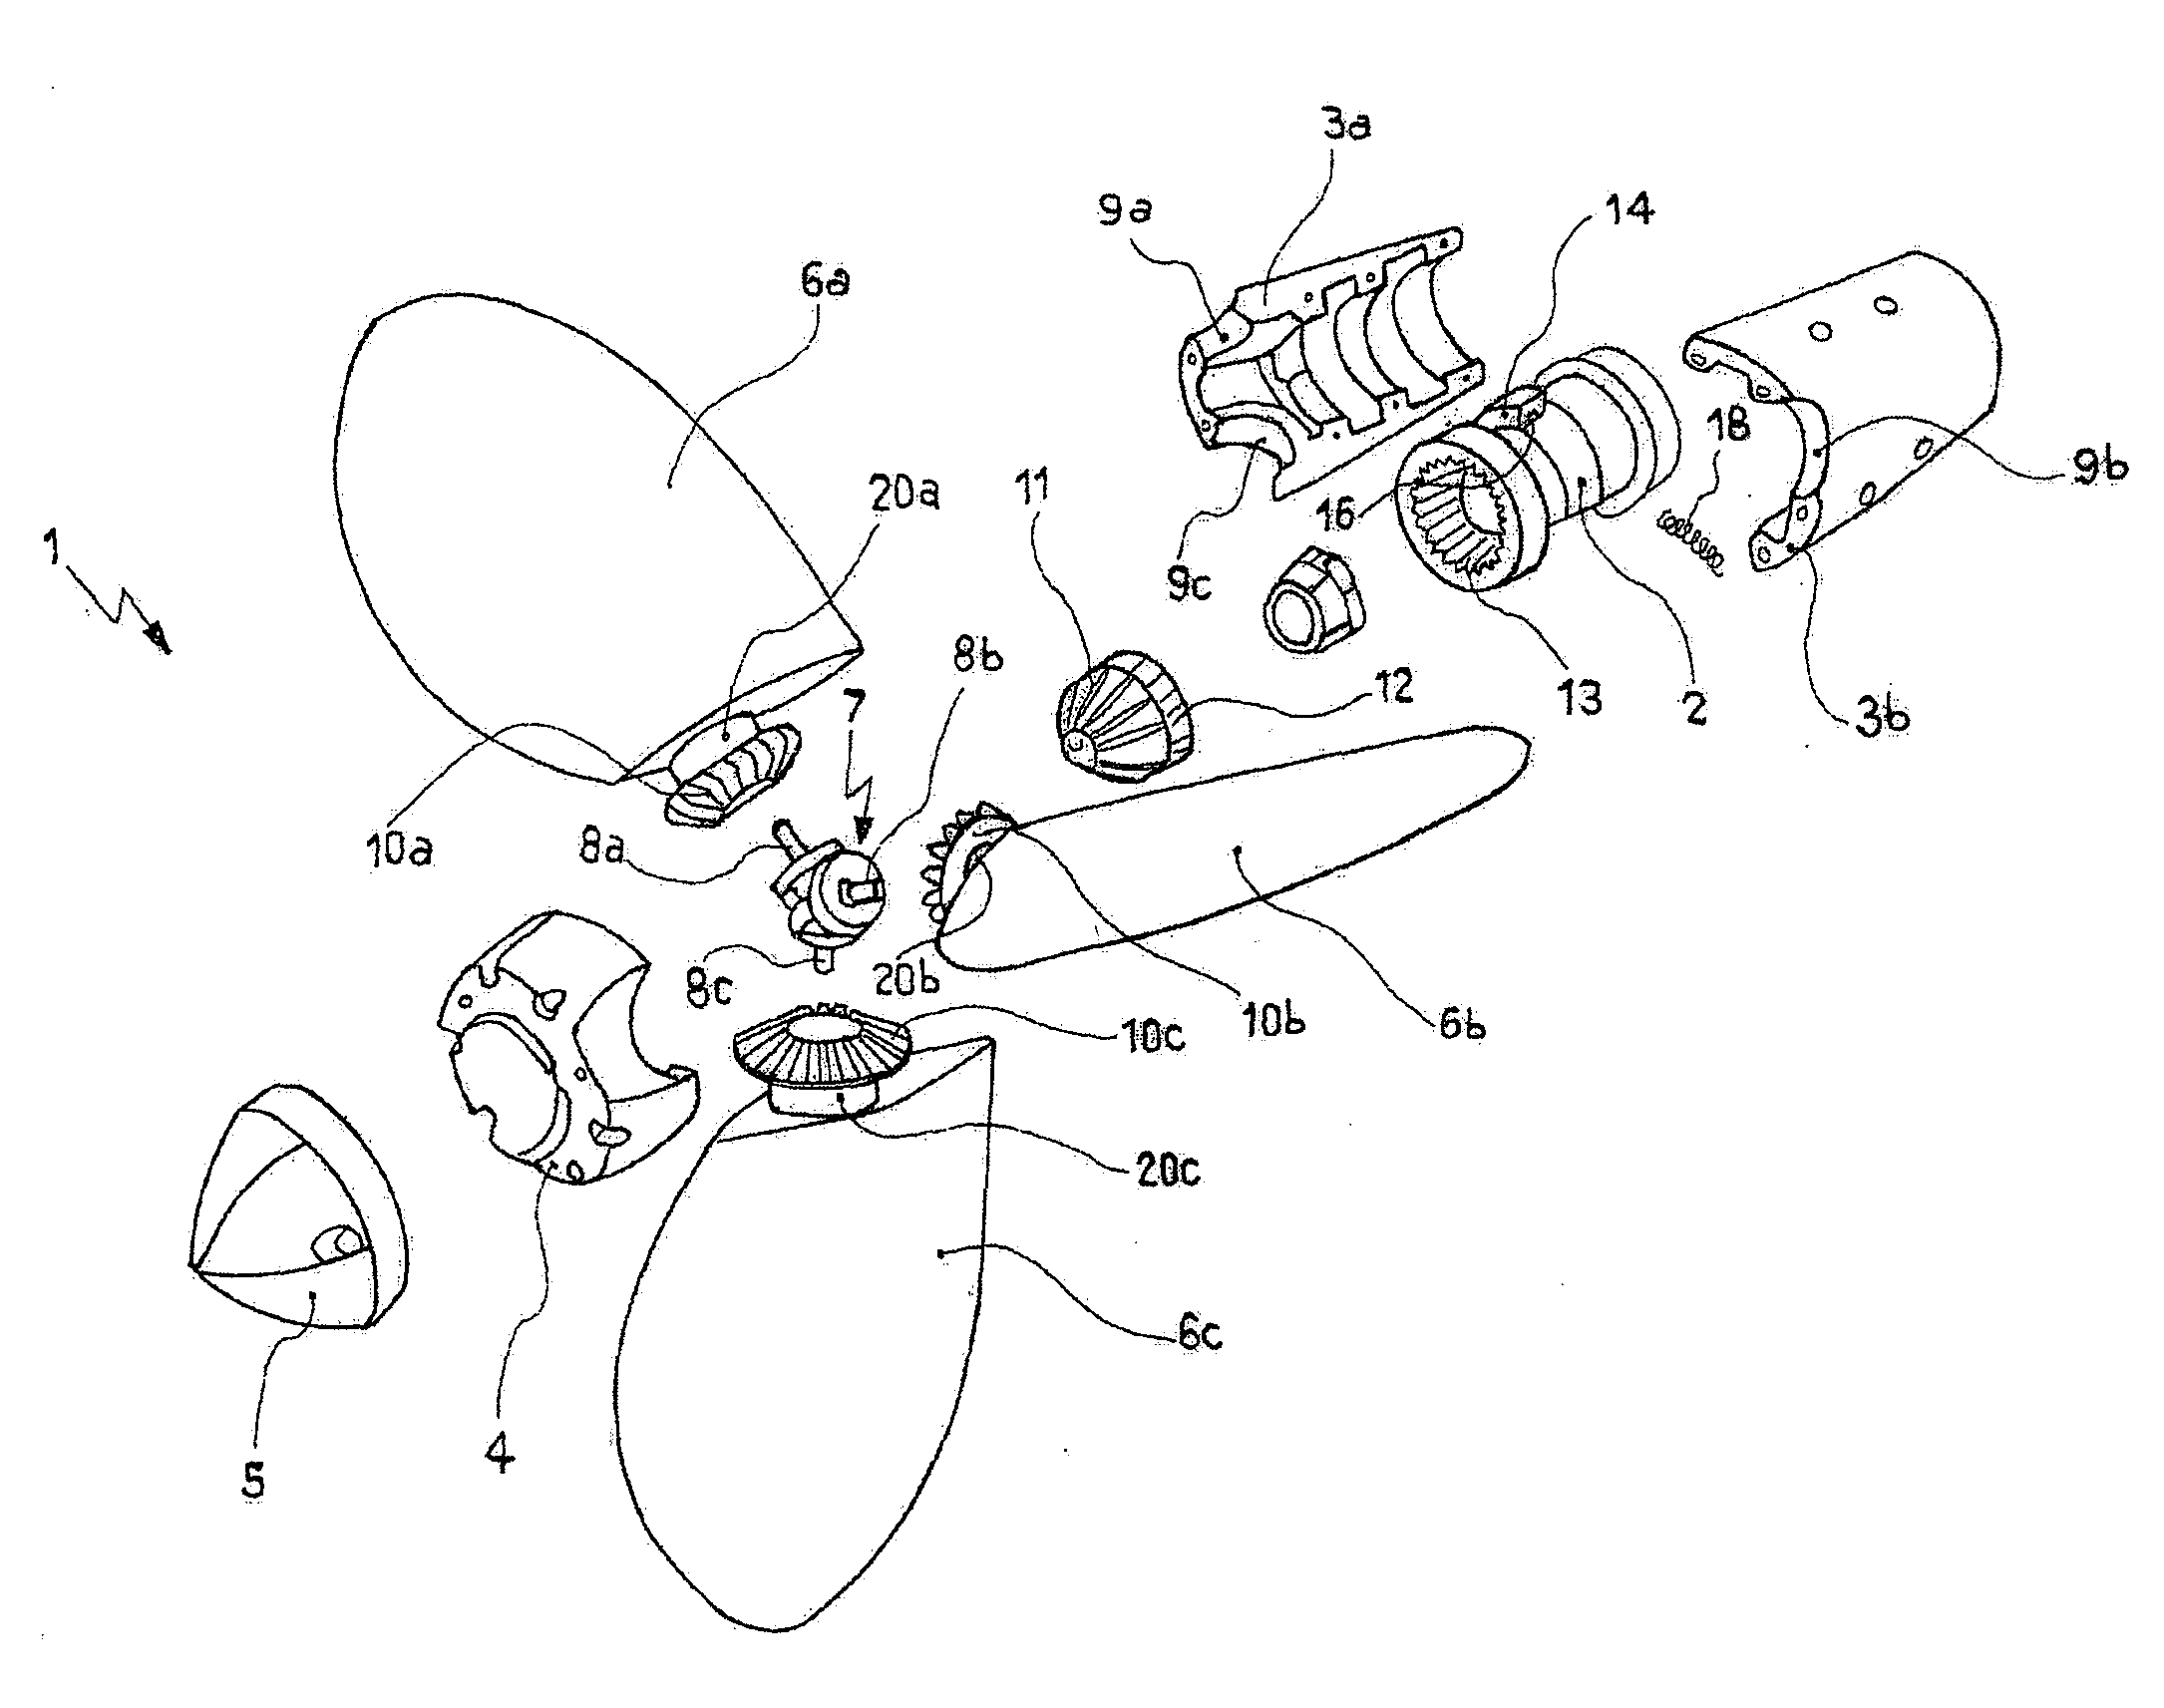 Variable-pitch propeller